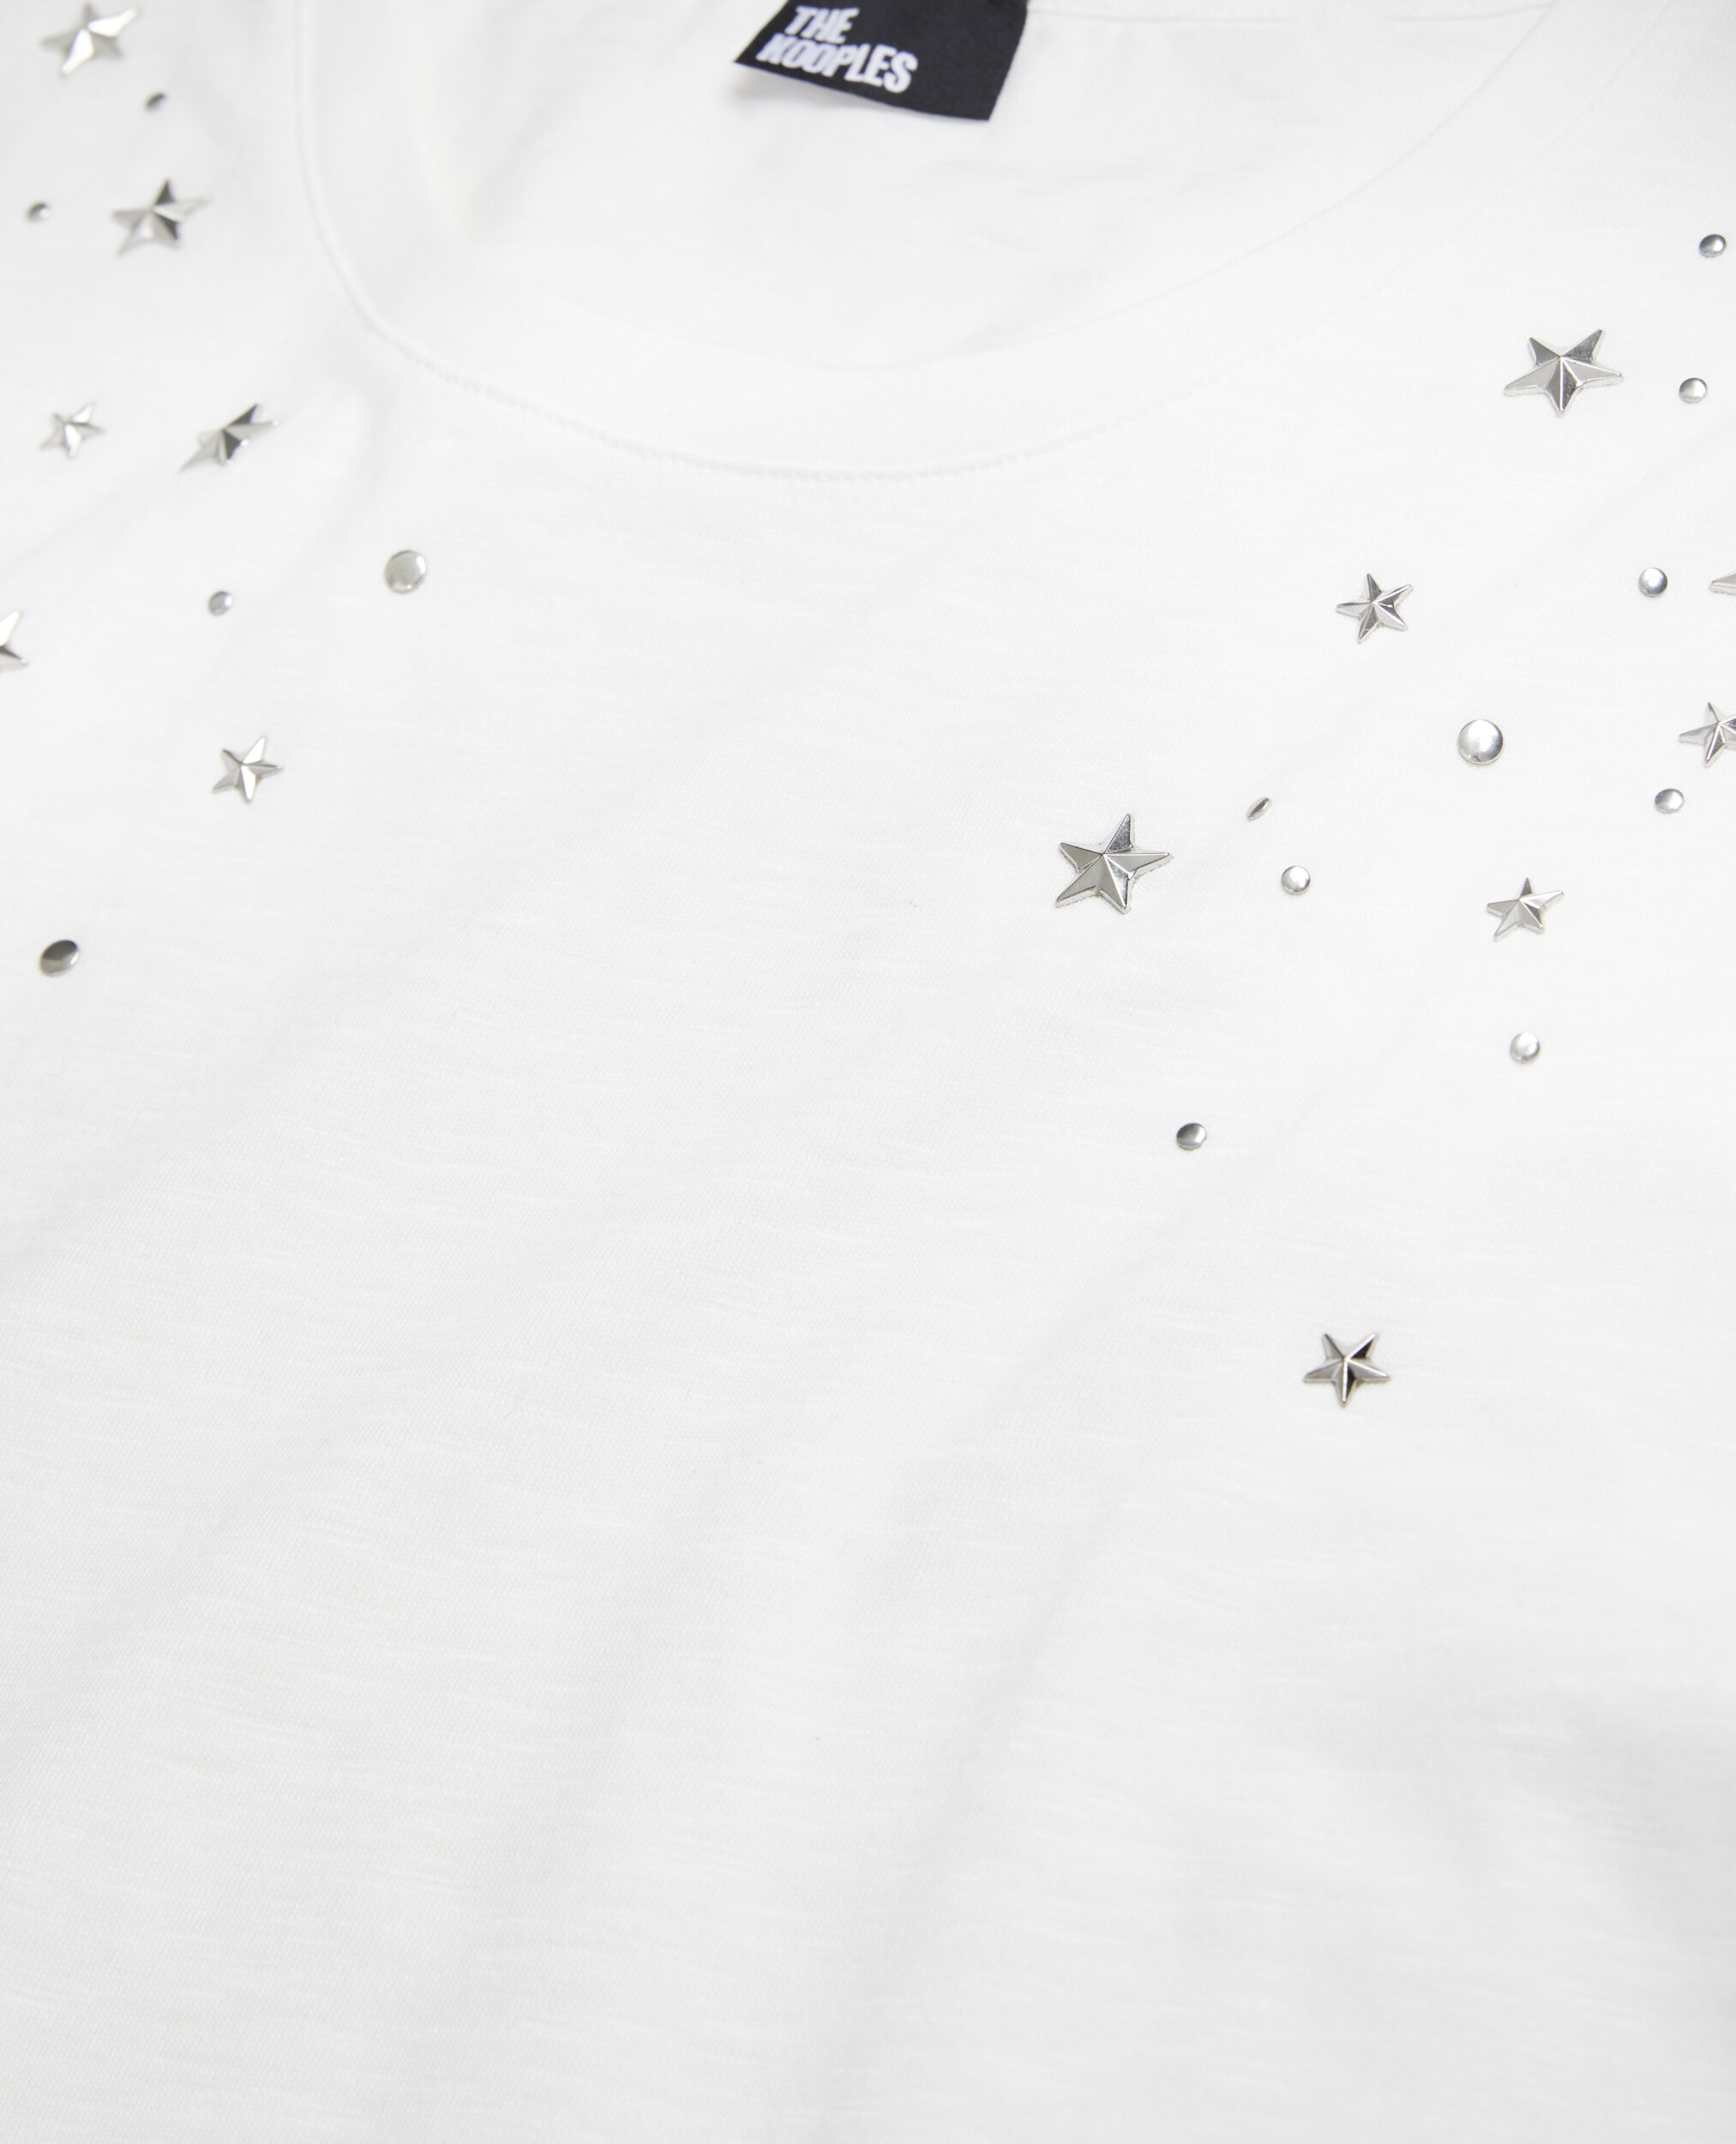 Women's white t-shirt with stars, WHITE, hi-res image number null